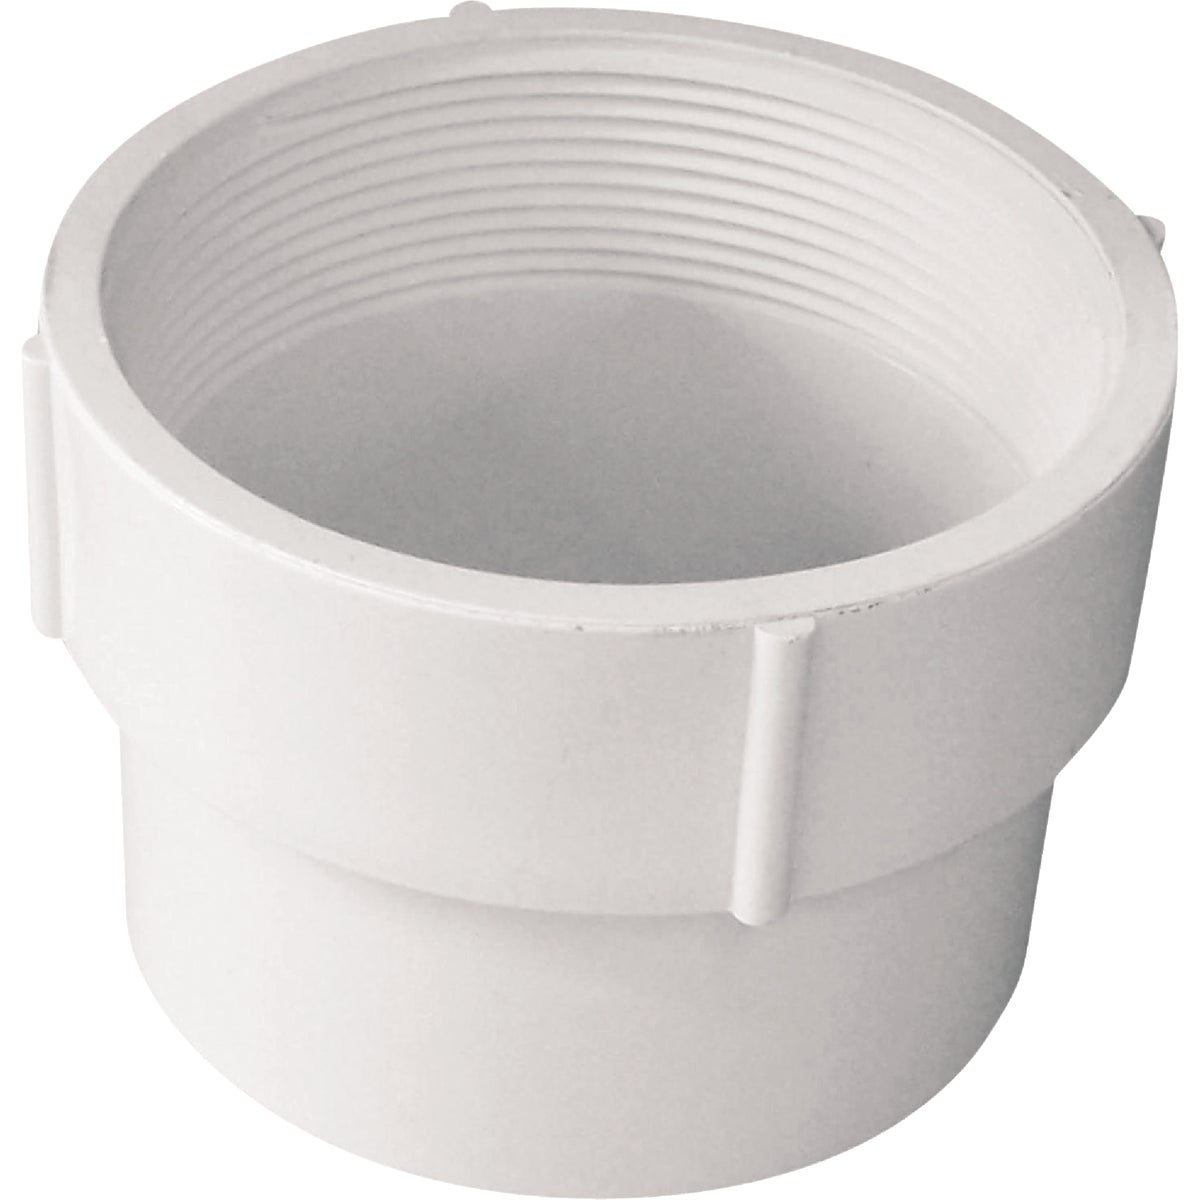 Item 435783, For thin wall drain and sewer pipe (ASTM 2729) and SDR-35 drain and sewer 